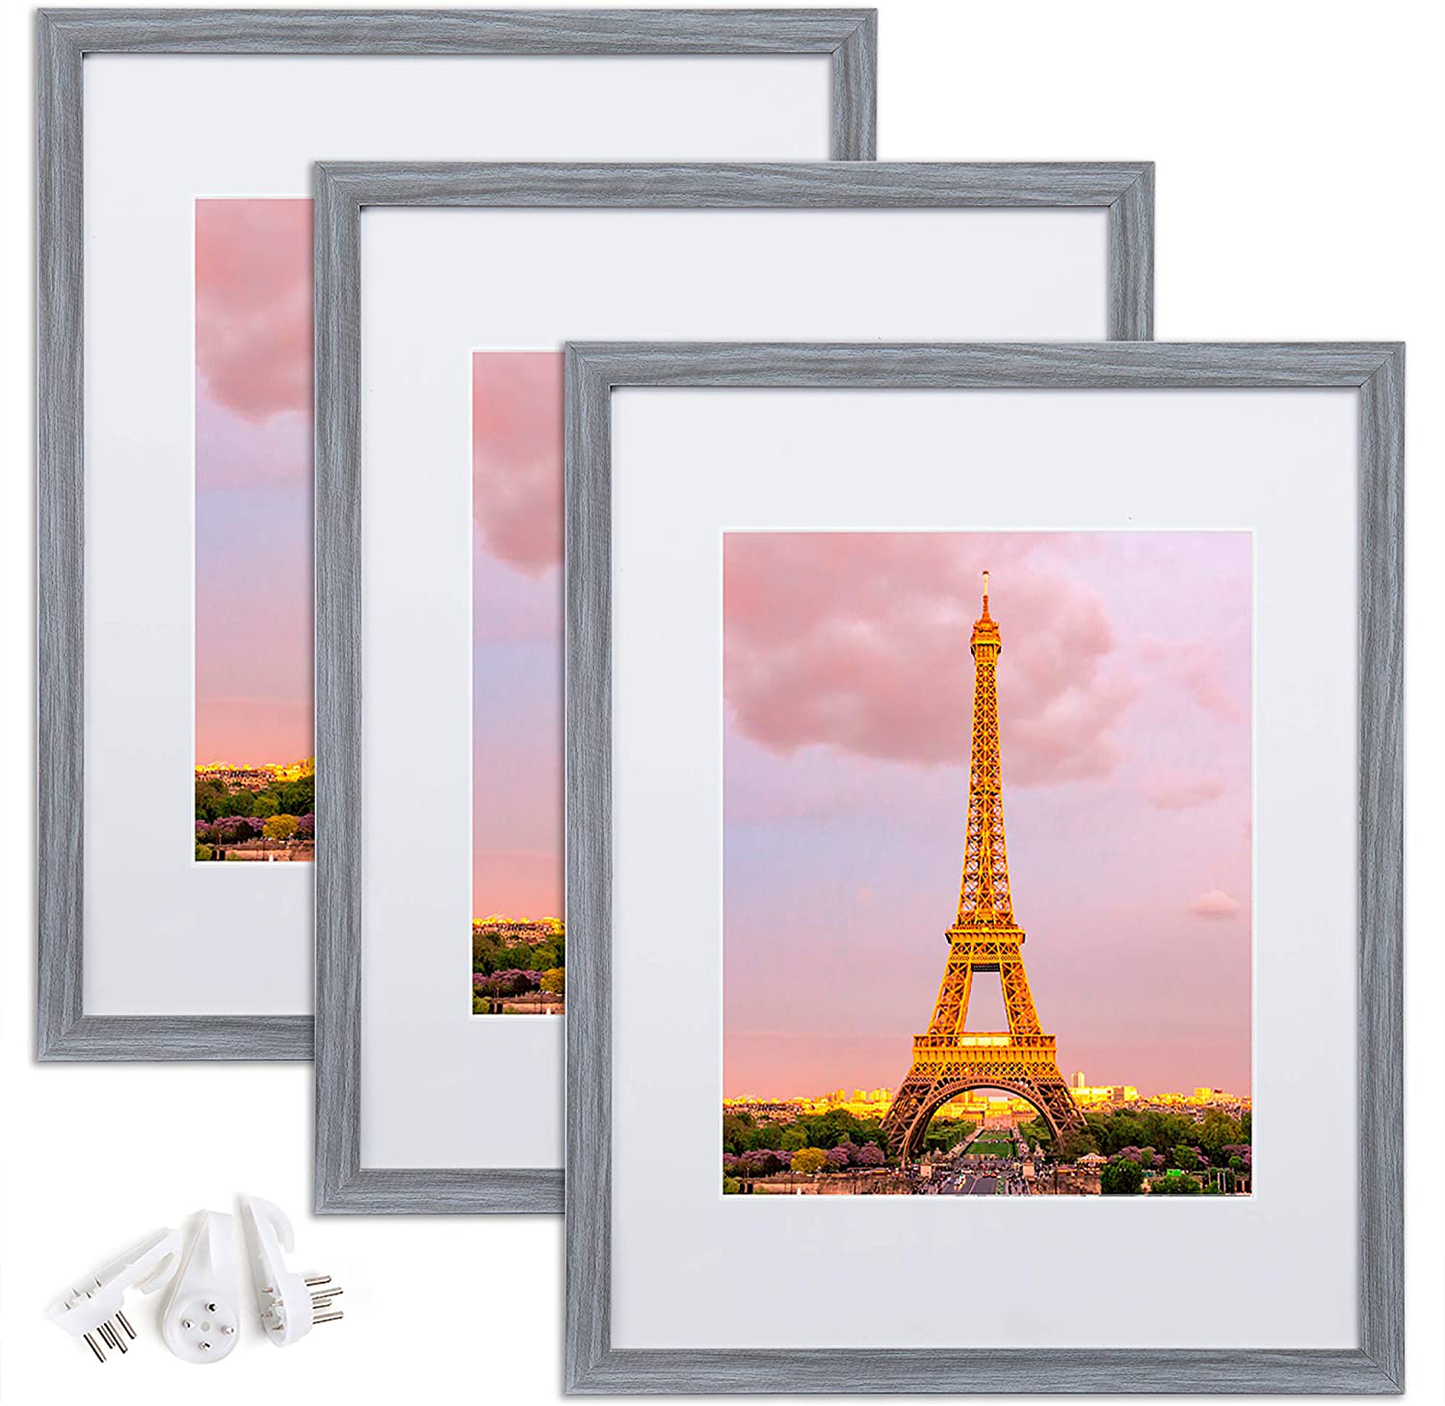 upsimples 11x14 Picture Frame Set of 3,Made of High Definition Glass for 8x10 with Mat or 11x14 Without Mat,Wall Mounting Photo Frame Ash Gray